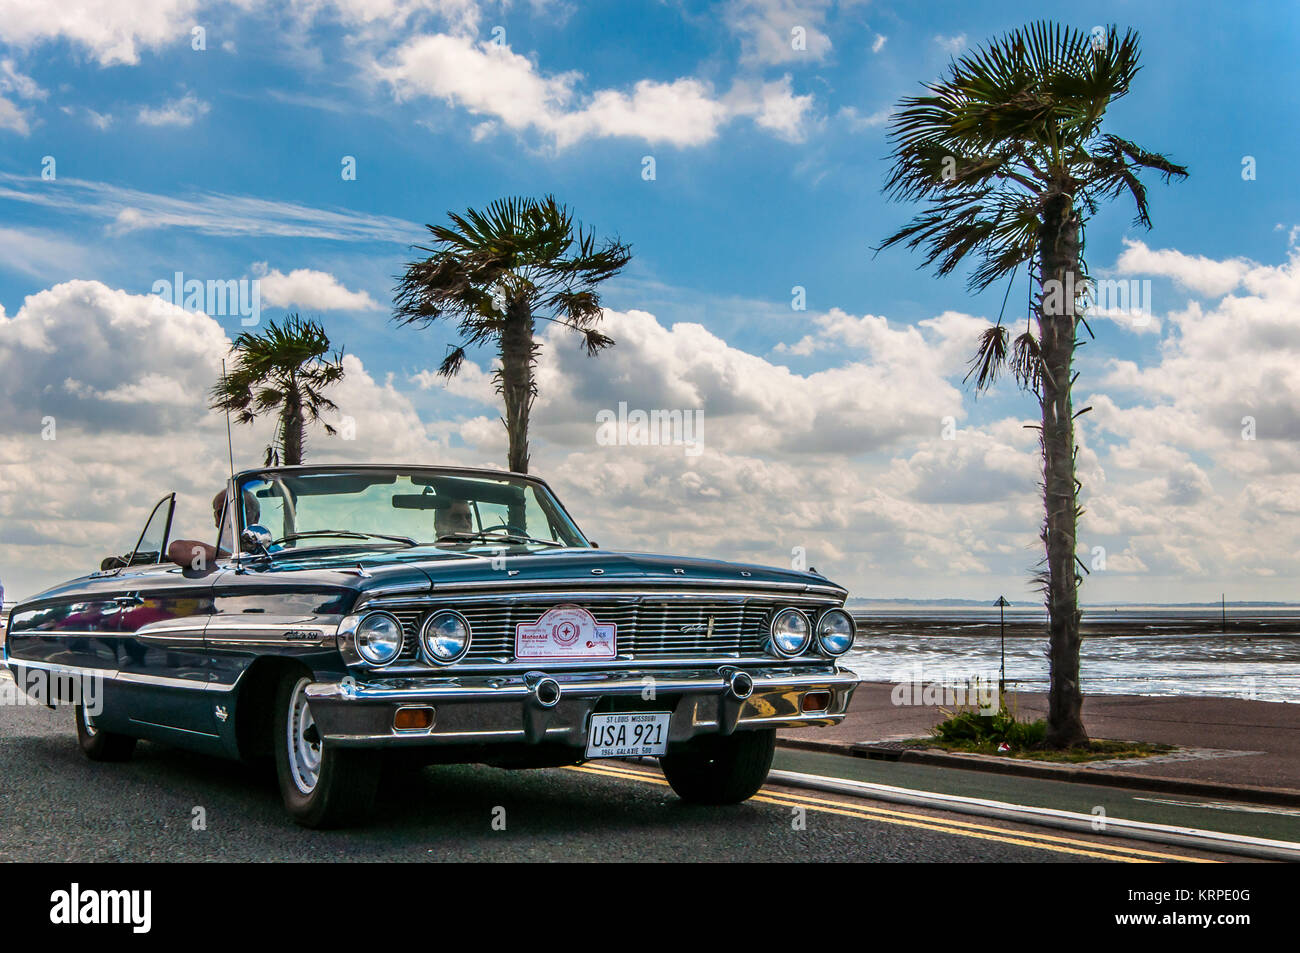 1964 Ford Galaxie 500 classic American car at Southend on Sea seafront with palm trees. USA plate. Vintage look. Seaside. Coast road Stock Photo